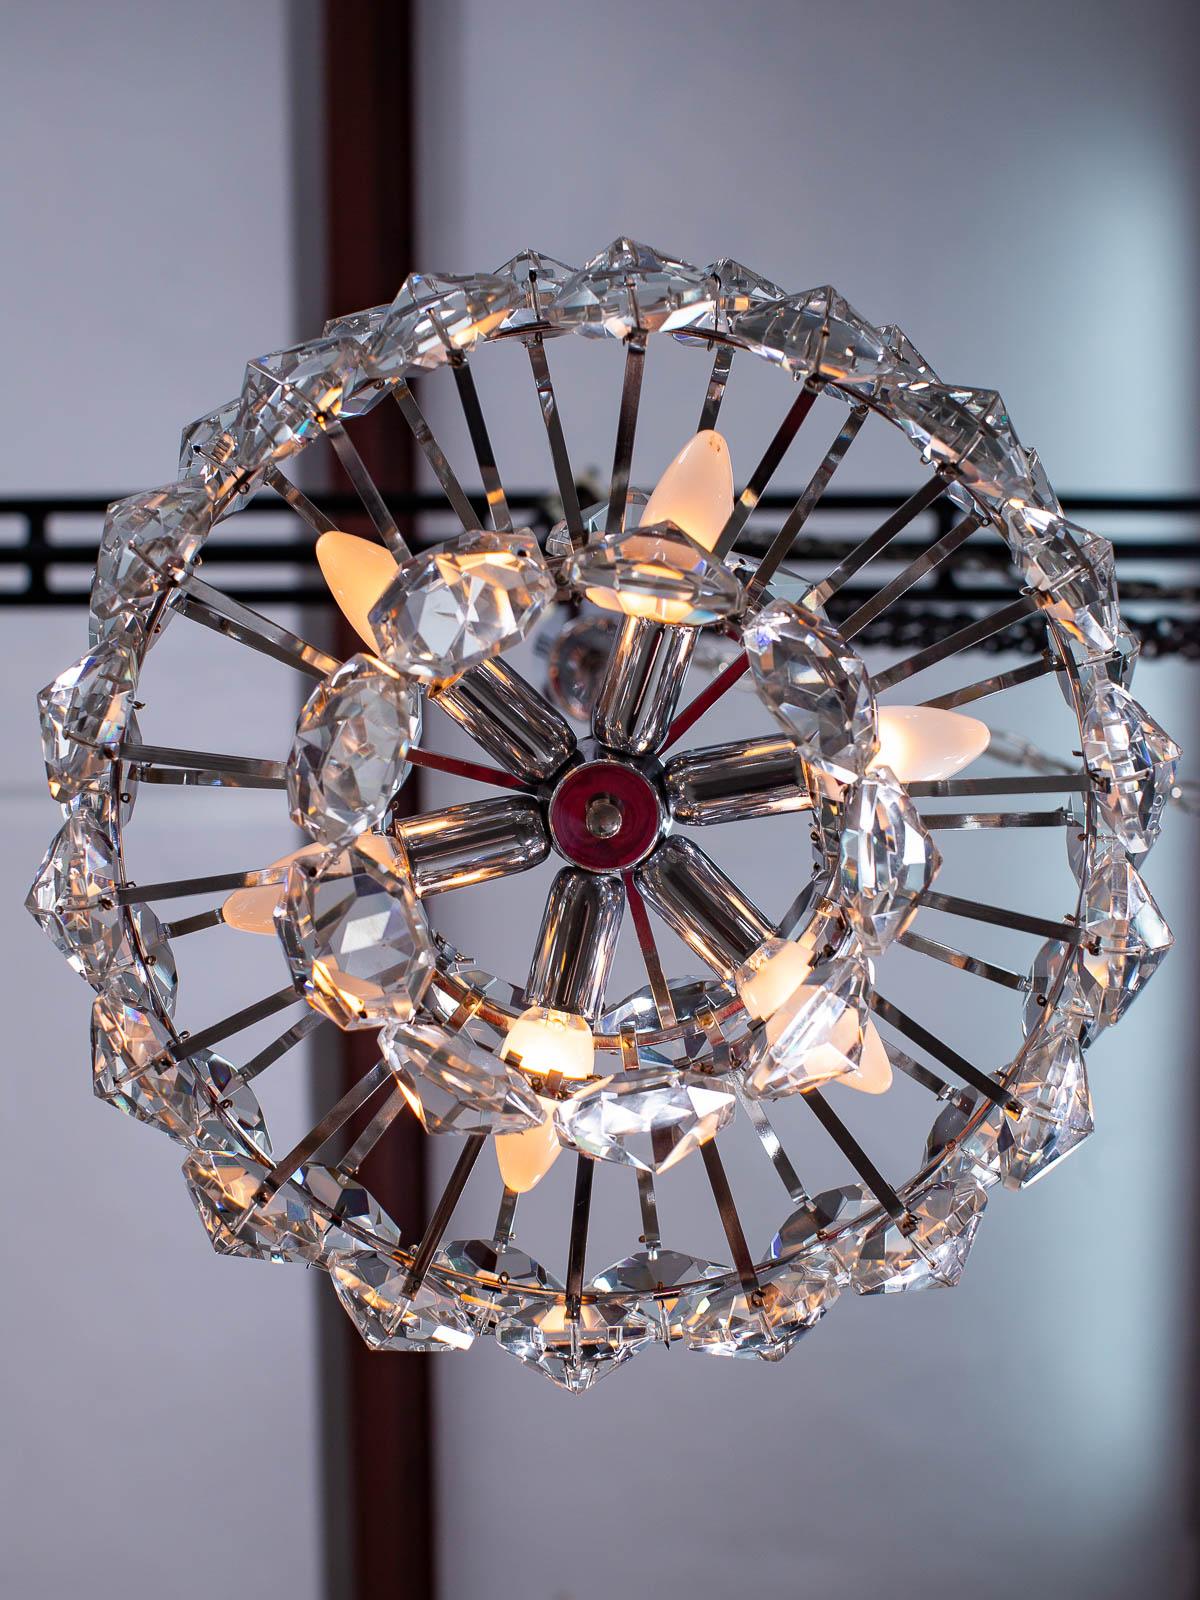 This superb Palwa vintage German crystal and chrome chandelier lighting fixture circa 1970 has a luxurious Minimalist feel. Palwa, the famous German lighting company founded nearly eighty years ago, remains notable for their use of chrome and gilded